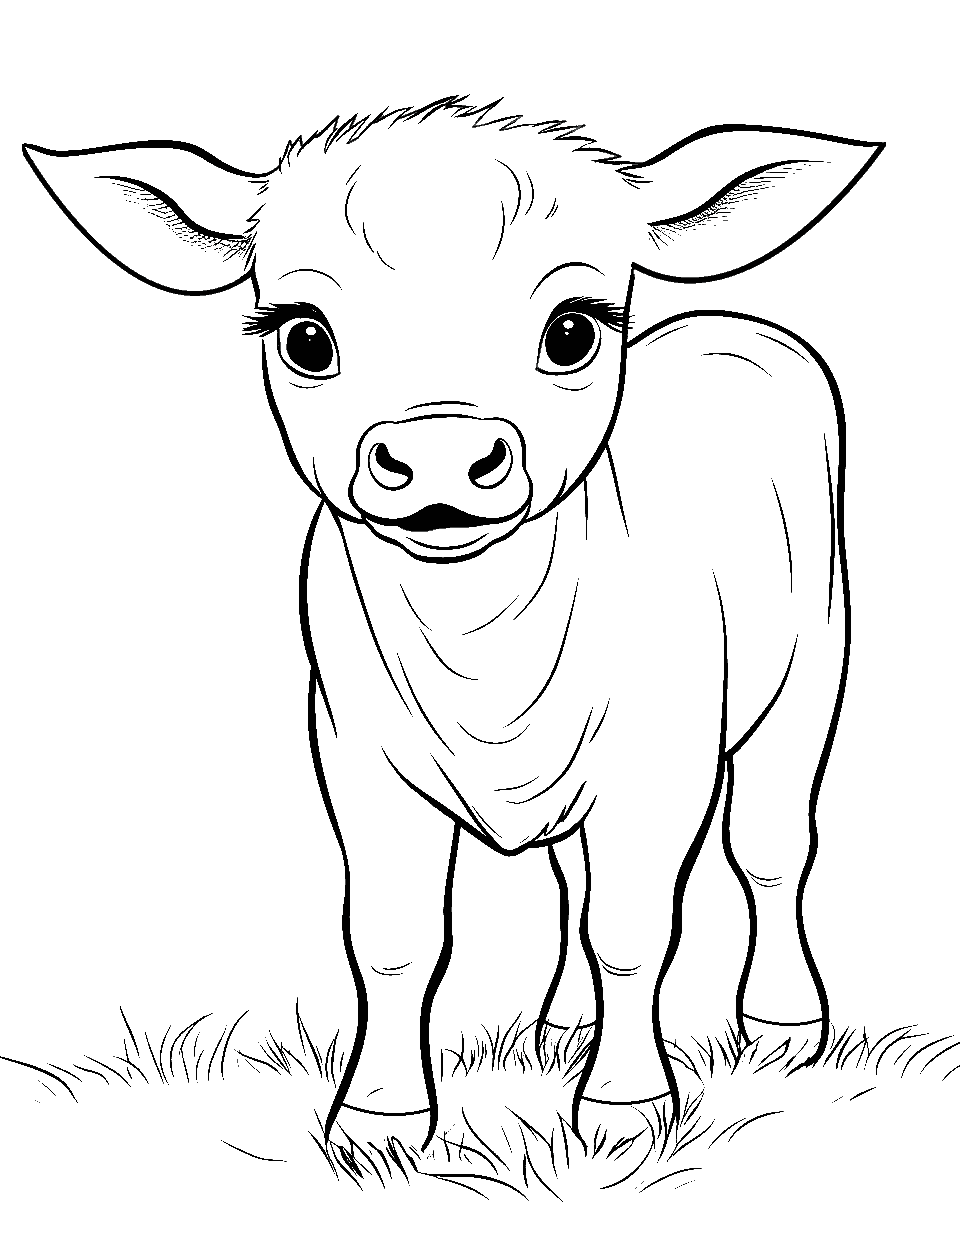 Cute Baby Cow Coloring Page - A chubby baby cow with big eyes exploring a simple grassy field.